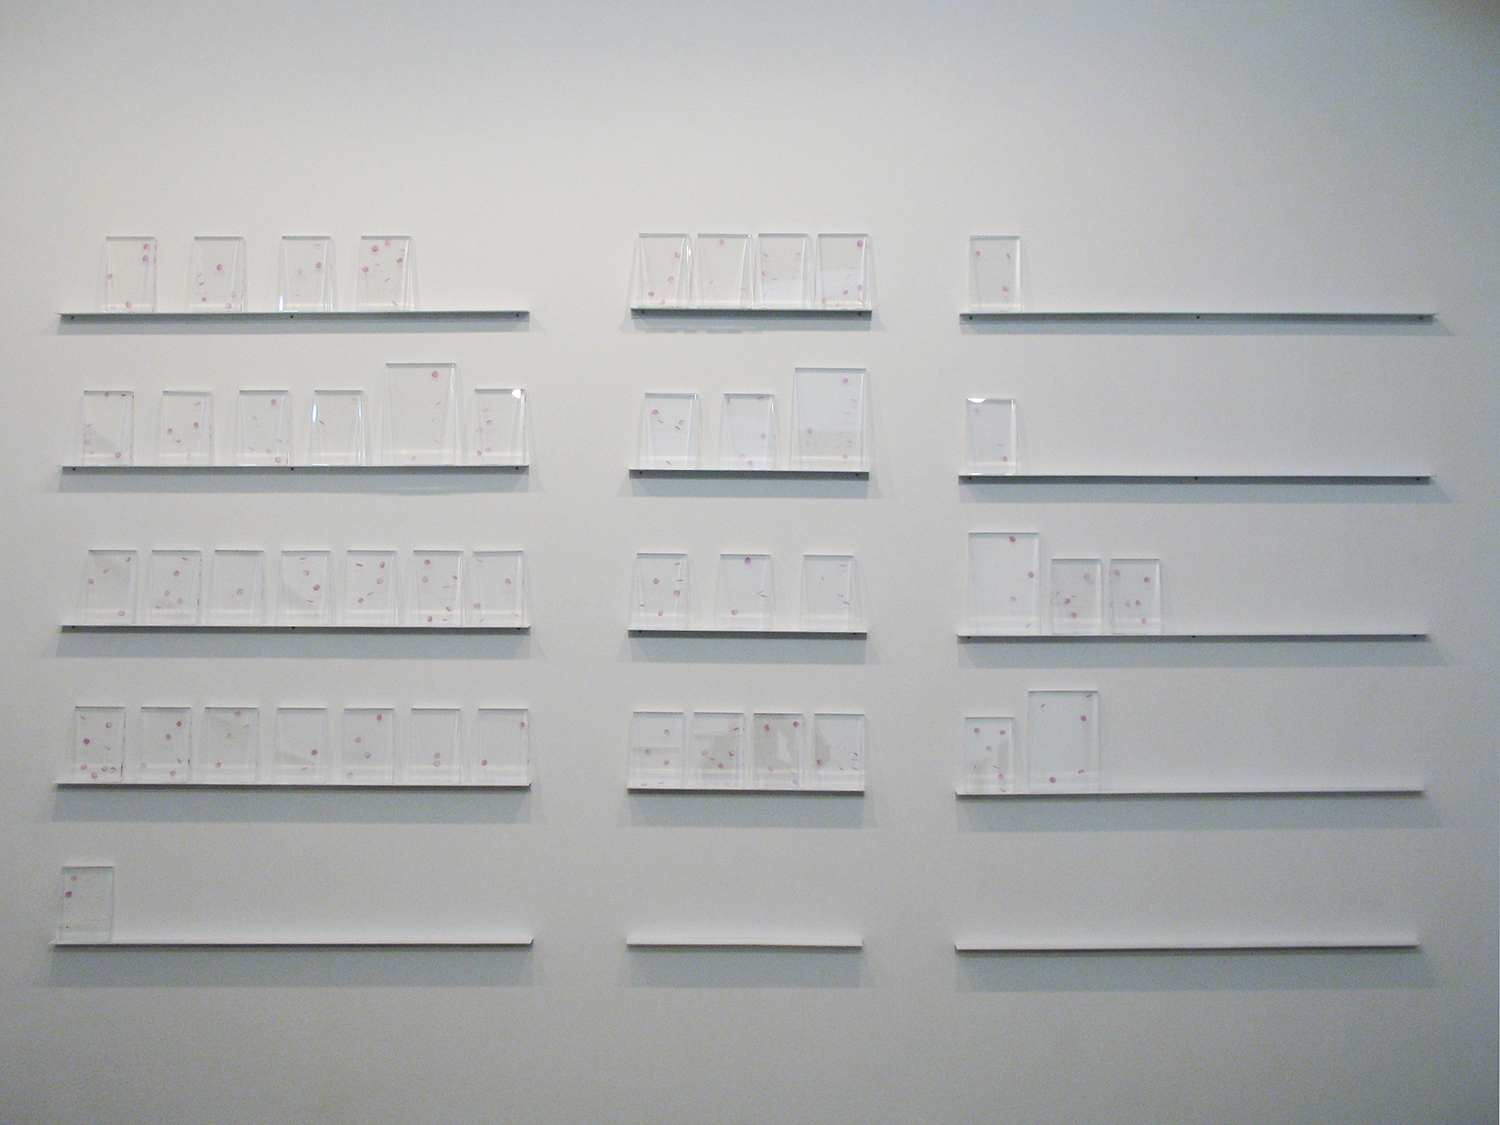 Installation view -  bookshelf, acrylic and transfer seal, 15.3 x 10.5 x 1.6 and 20.8 x 14.8 x 1.6 cm each, 2008